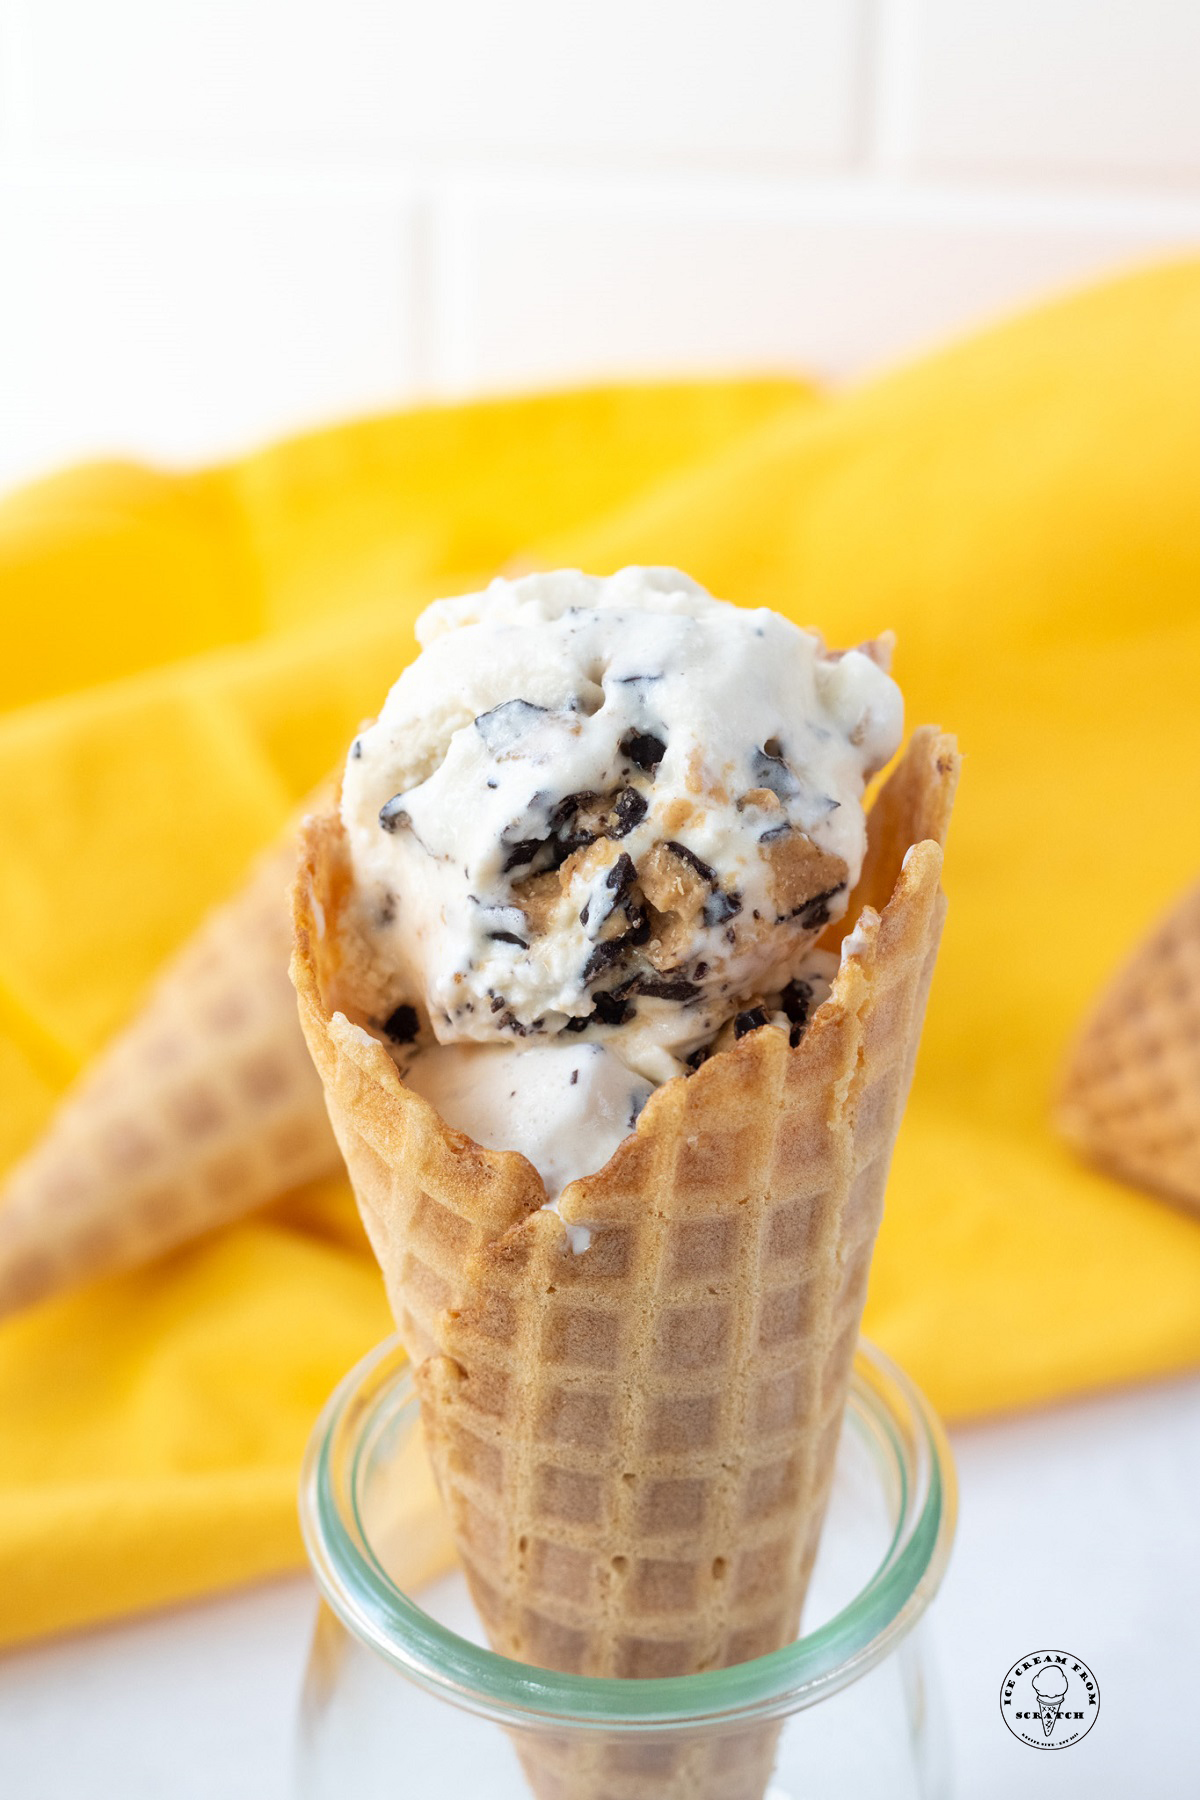 a waffle cone holding homemade ice cream with butter brickle toffee pieces. in the background is a yellow cloth.